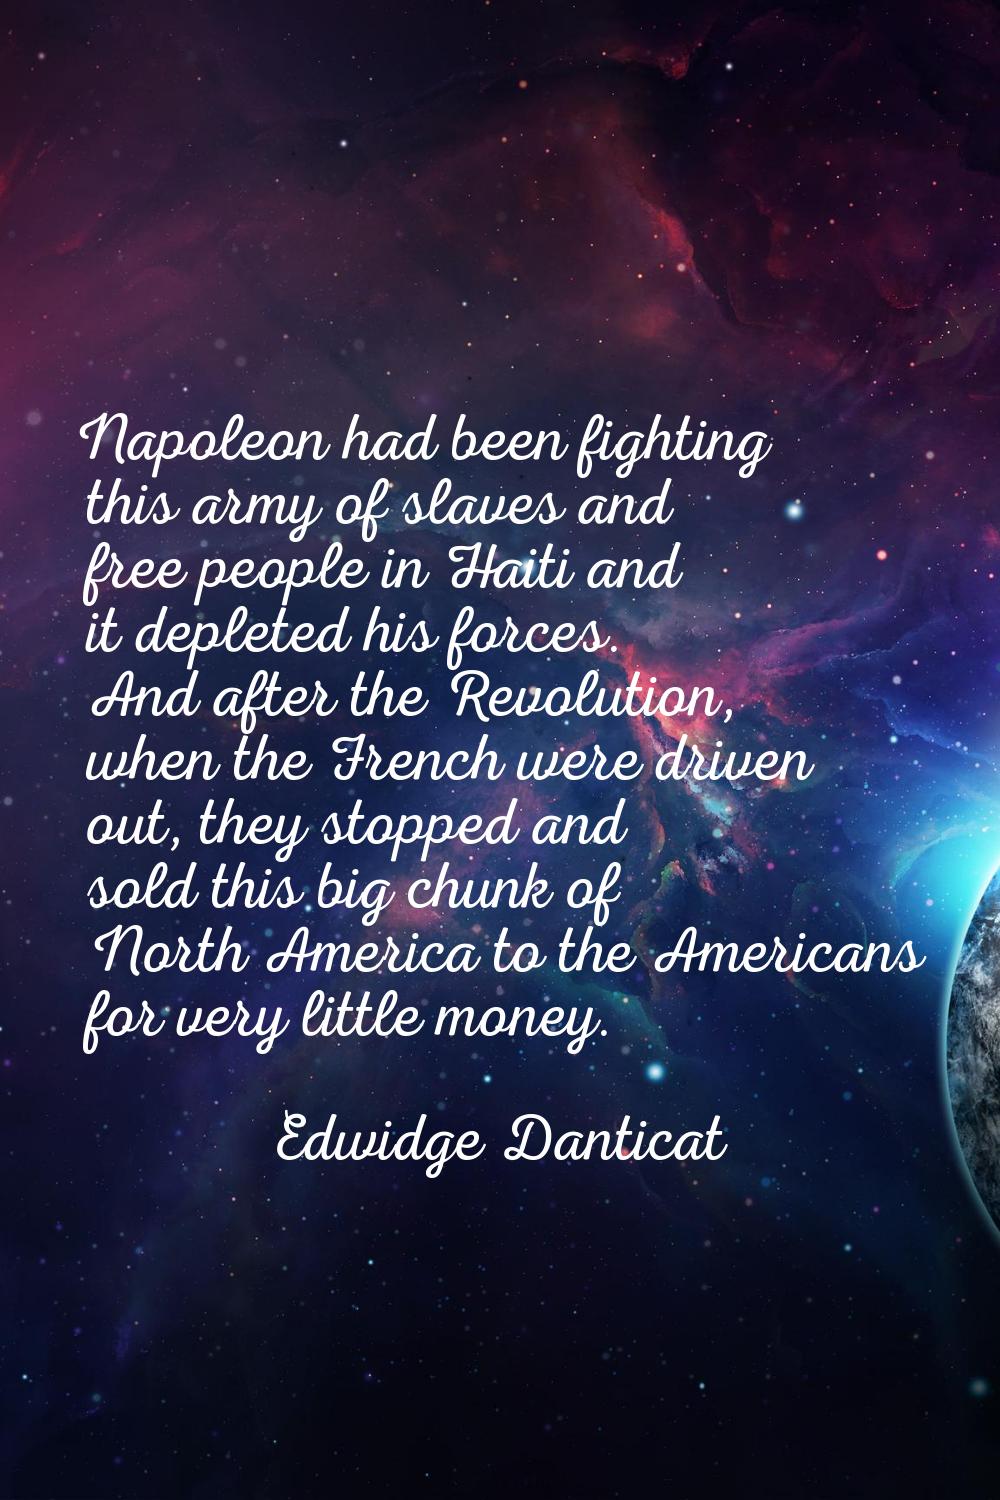 Napoleon had been fighting this army of slaves and free people in Haiti and it depleted his forces.